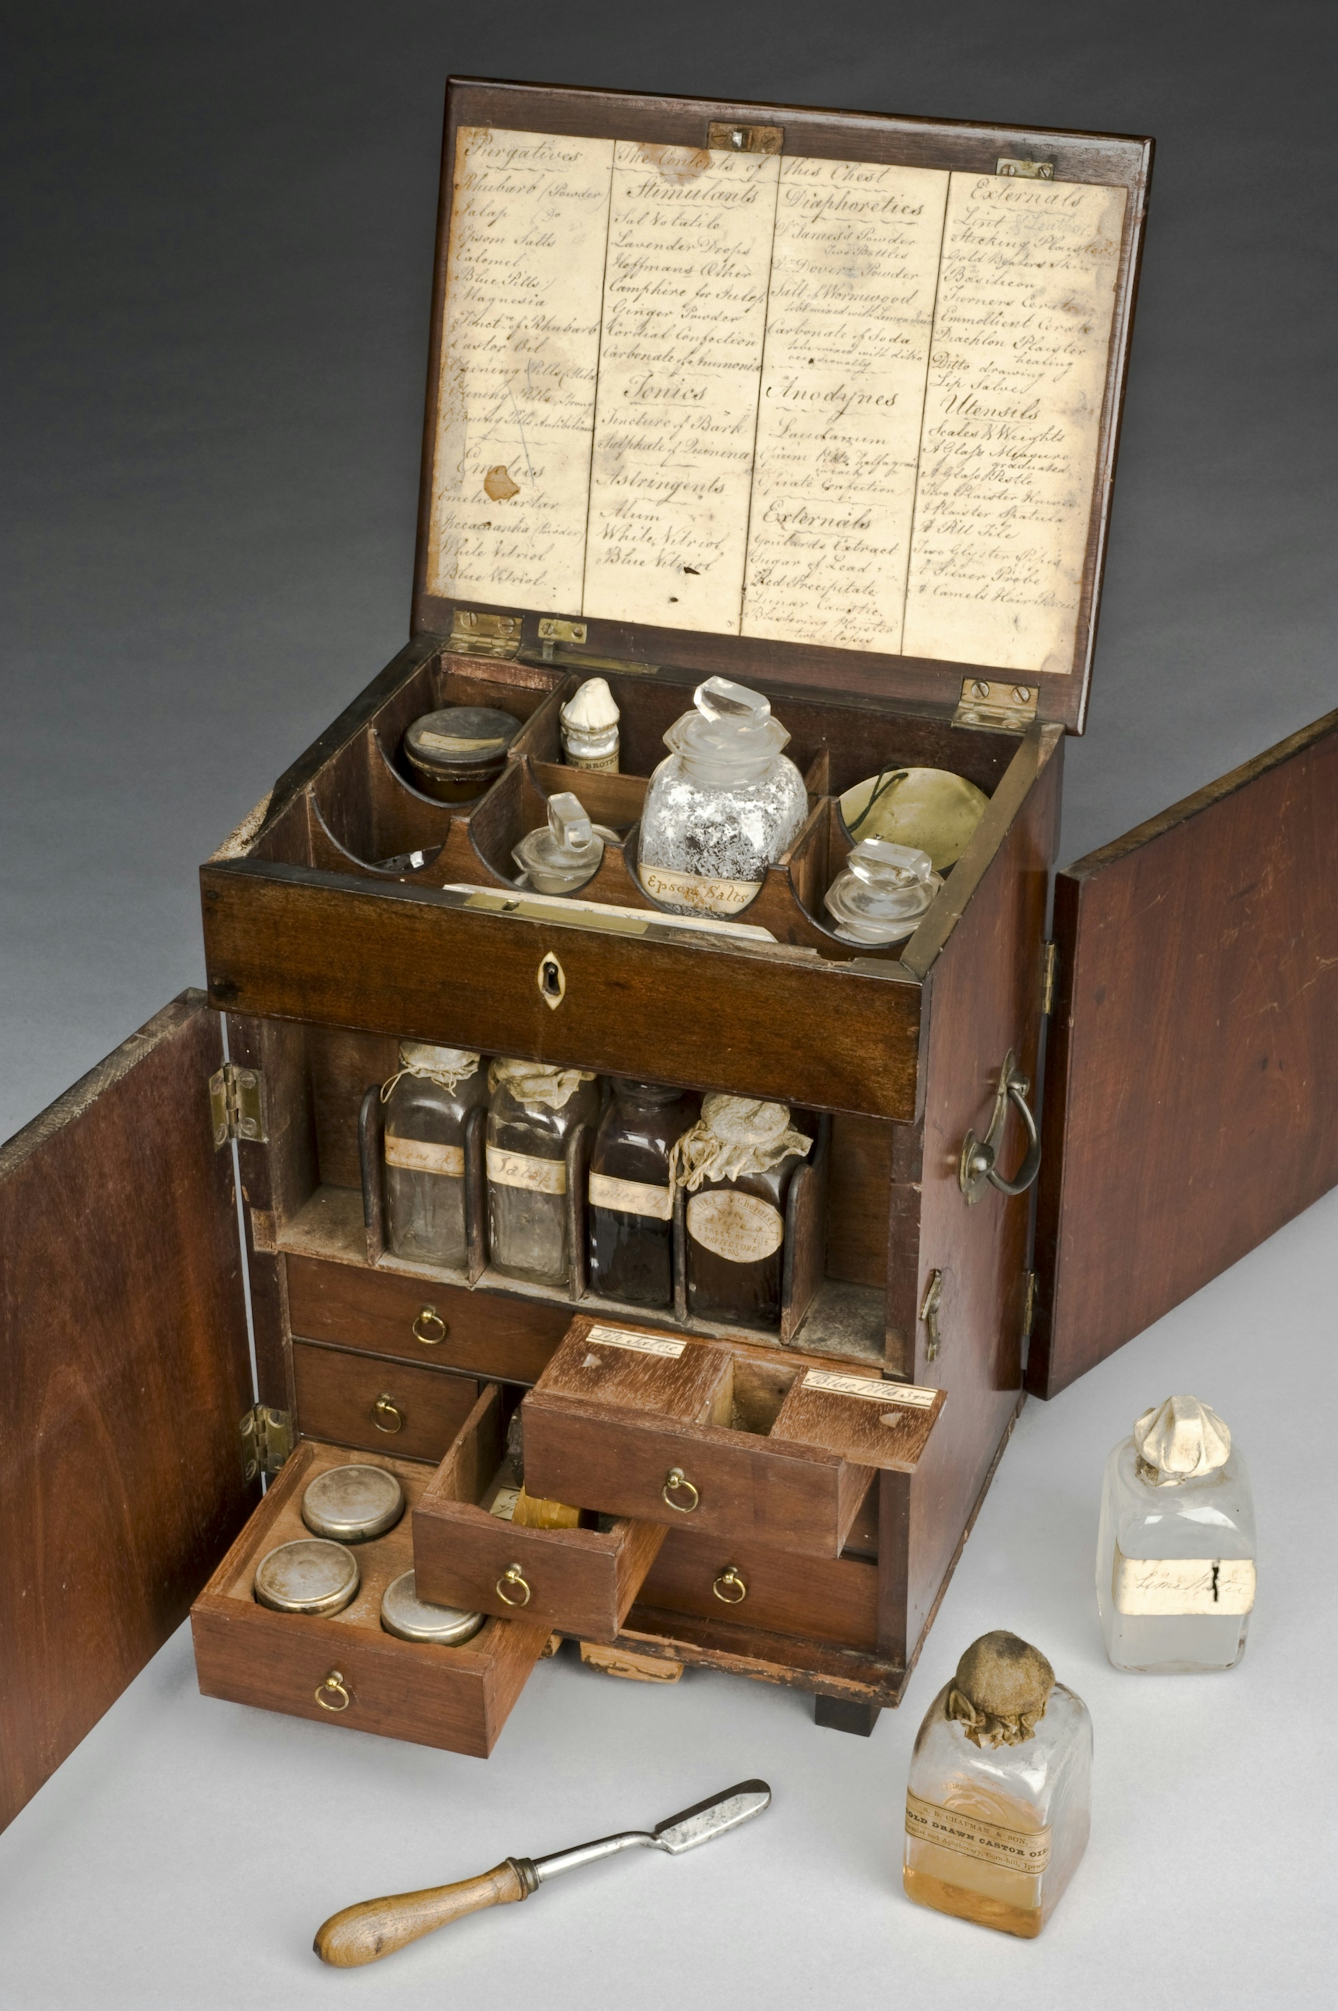 19th century mahogany medicine chest including bottles. One of these is labelled ginger.